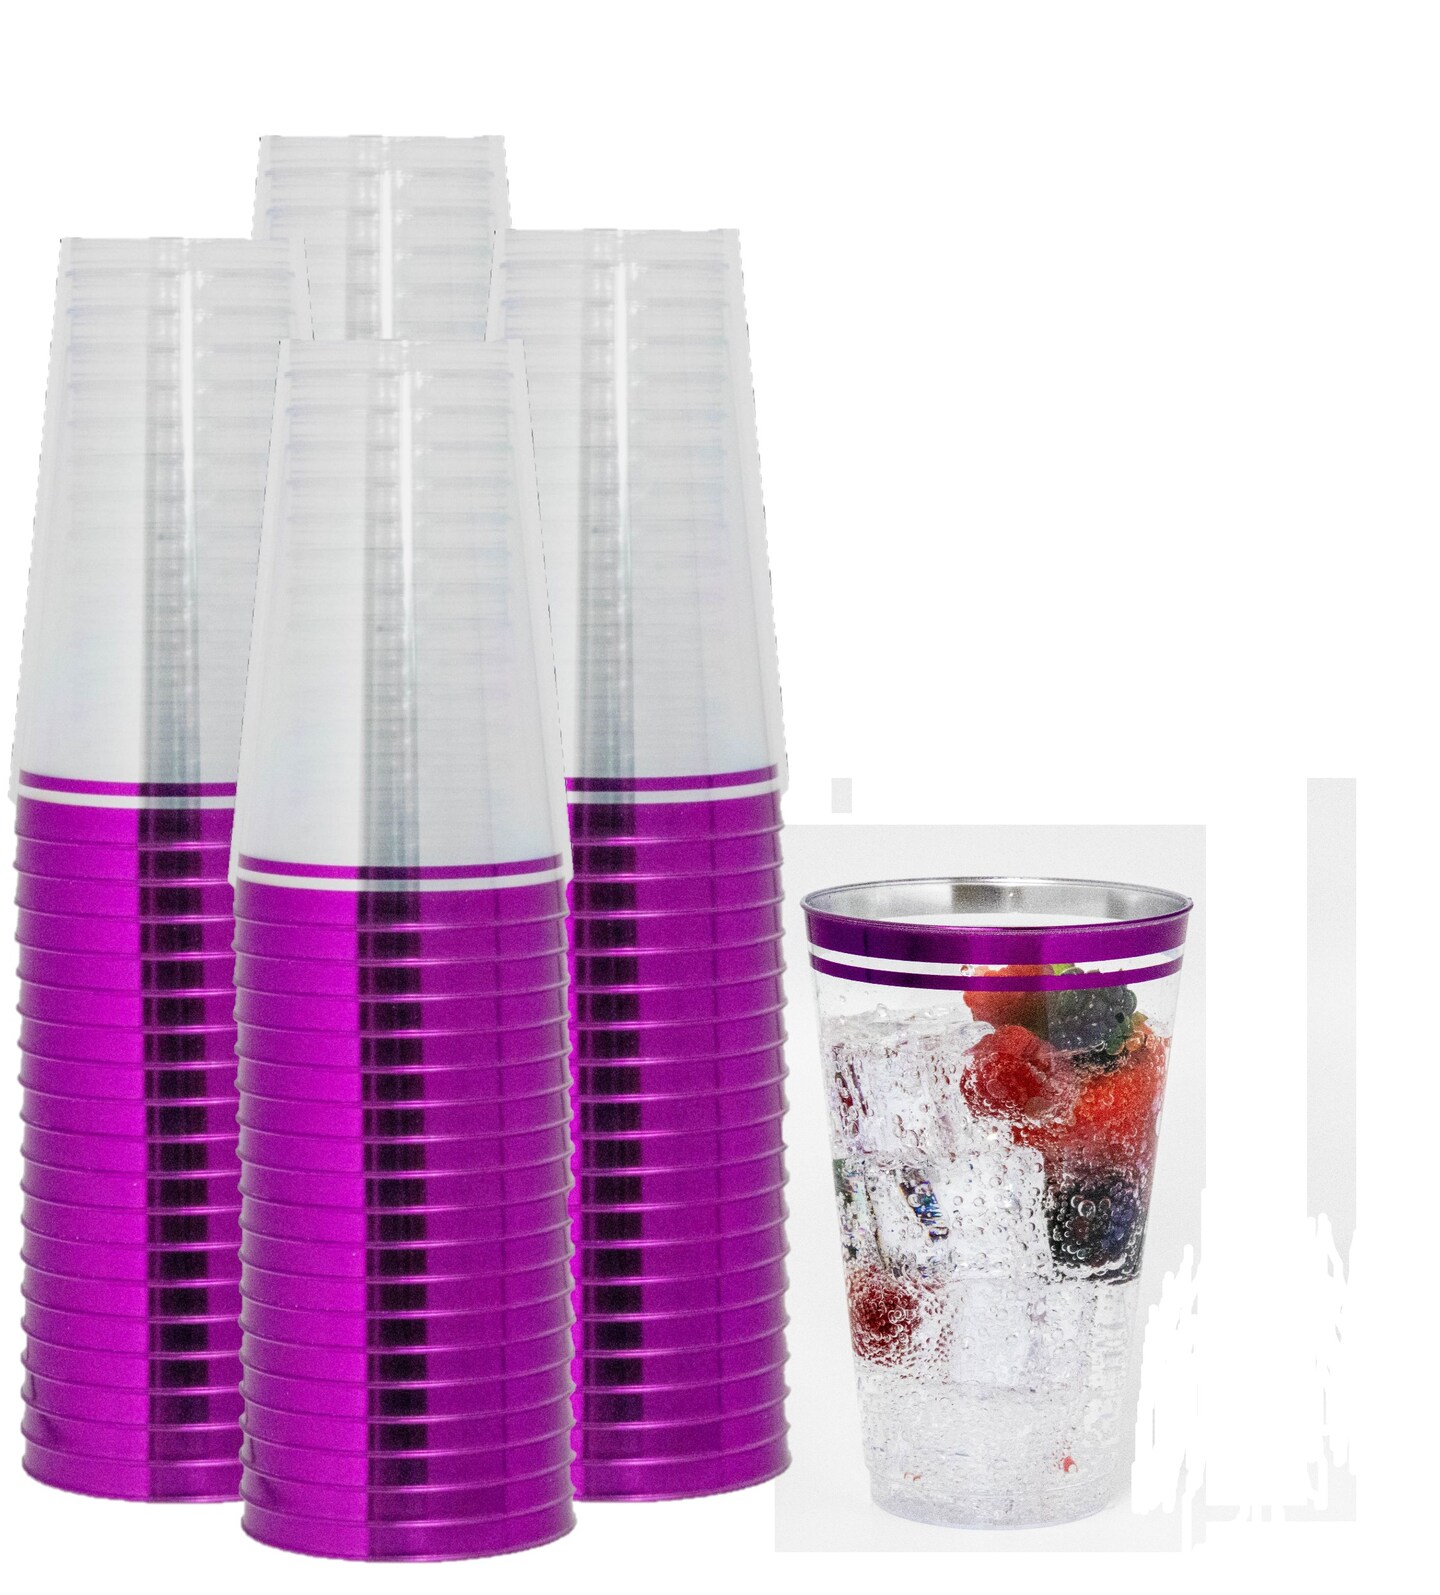 100 Pk 16 oz Clear Plastic Cups | Bright Purple Magenta Rimmed Disposable Cups